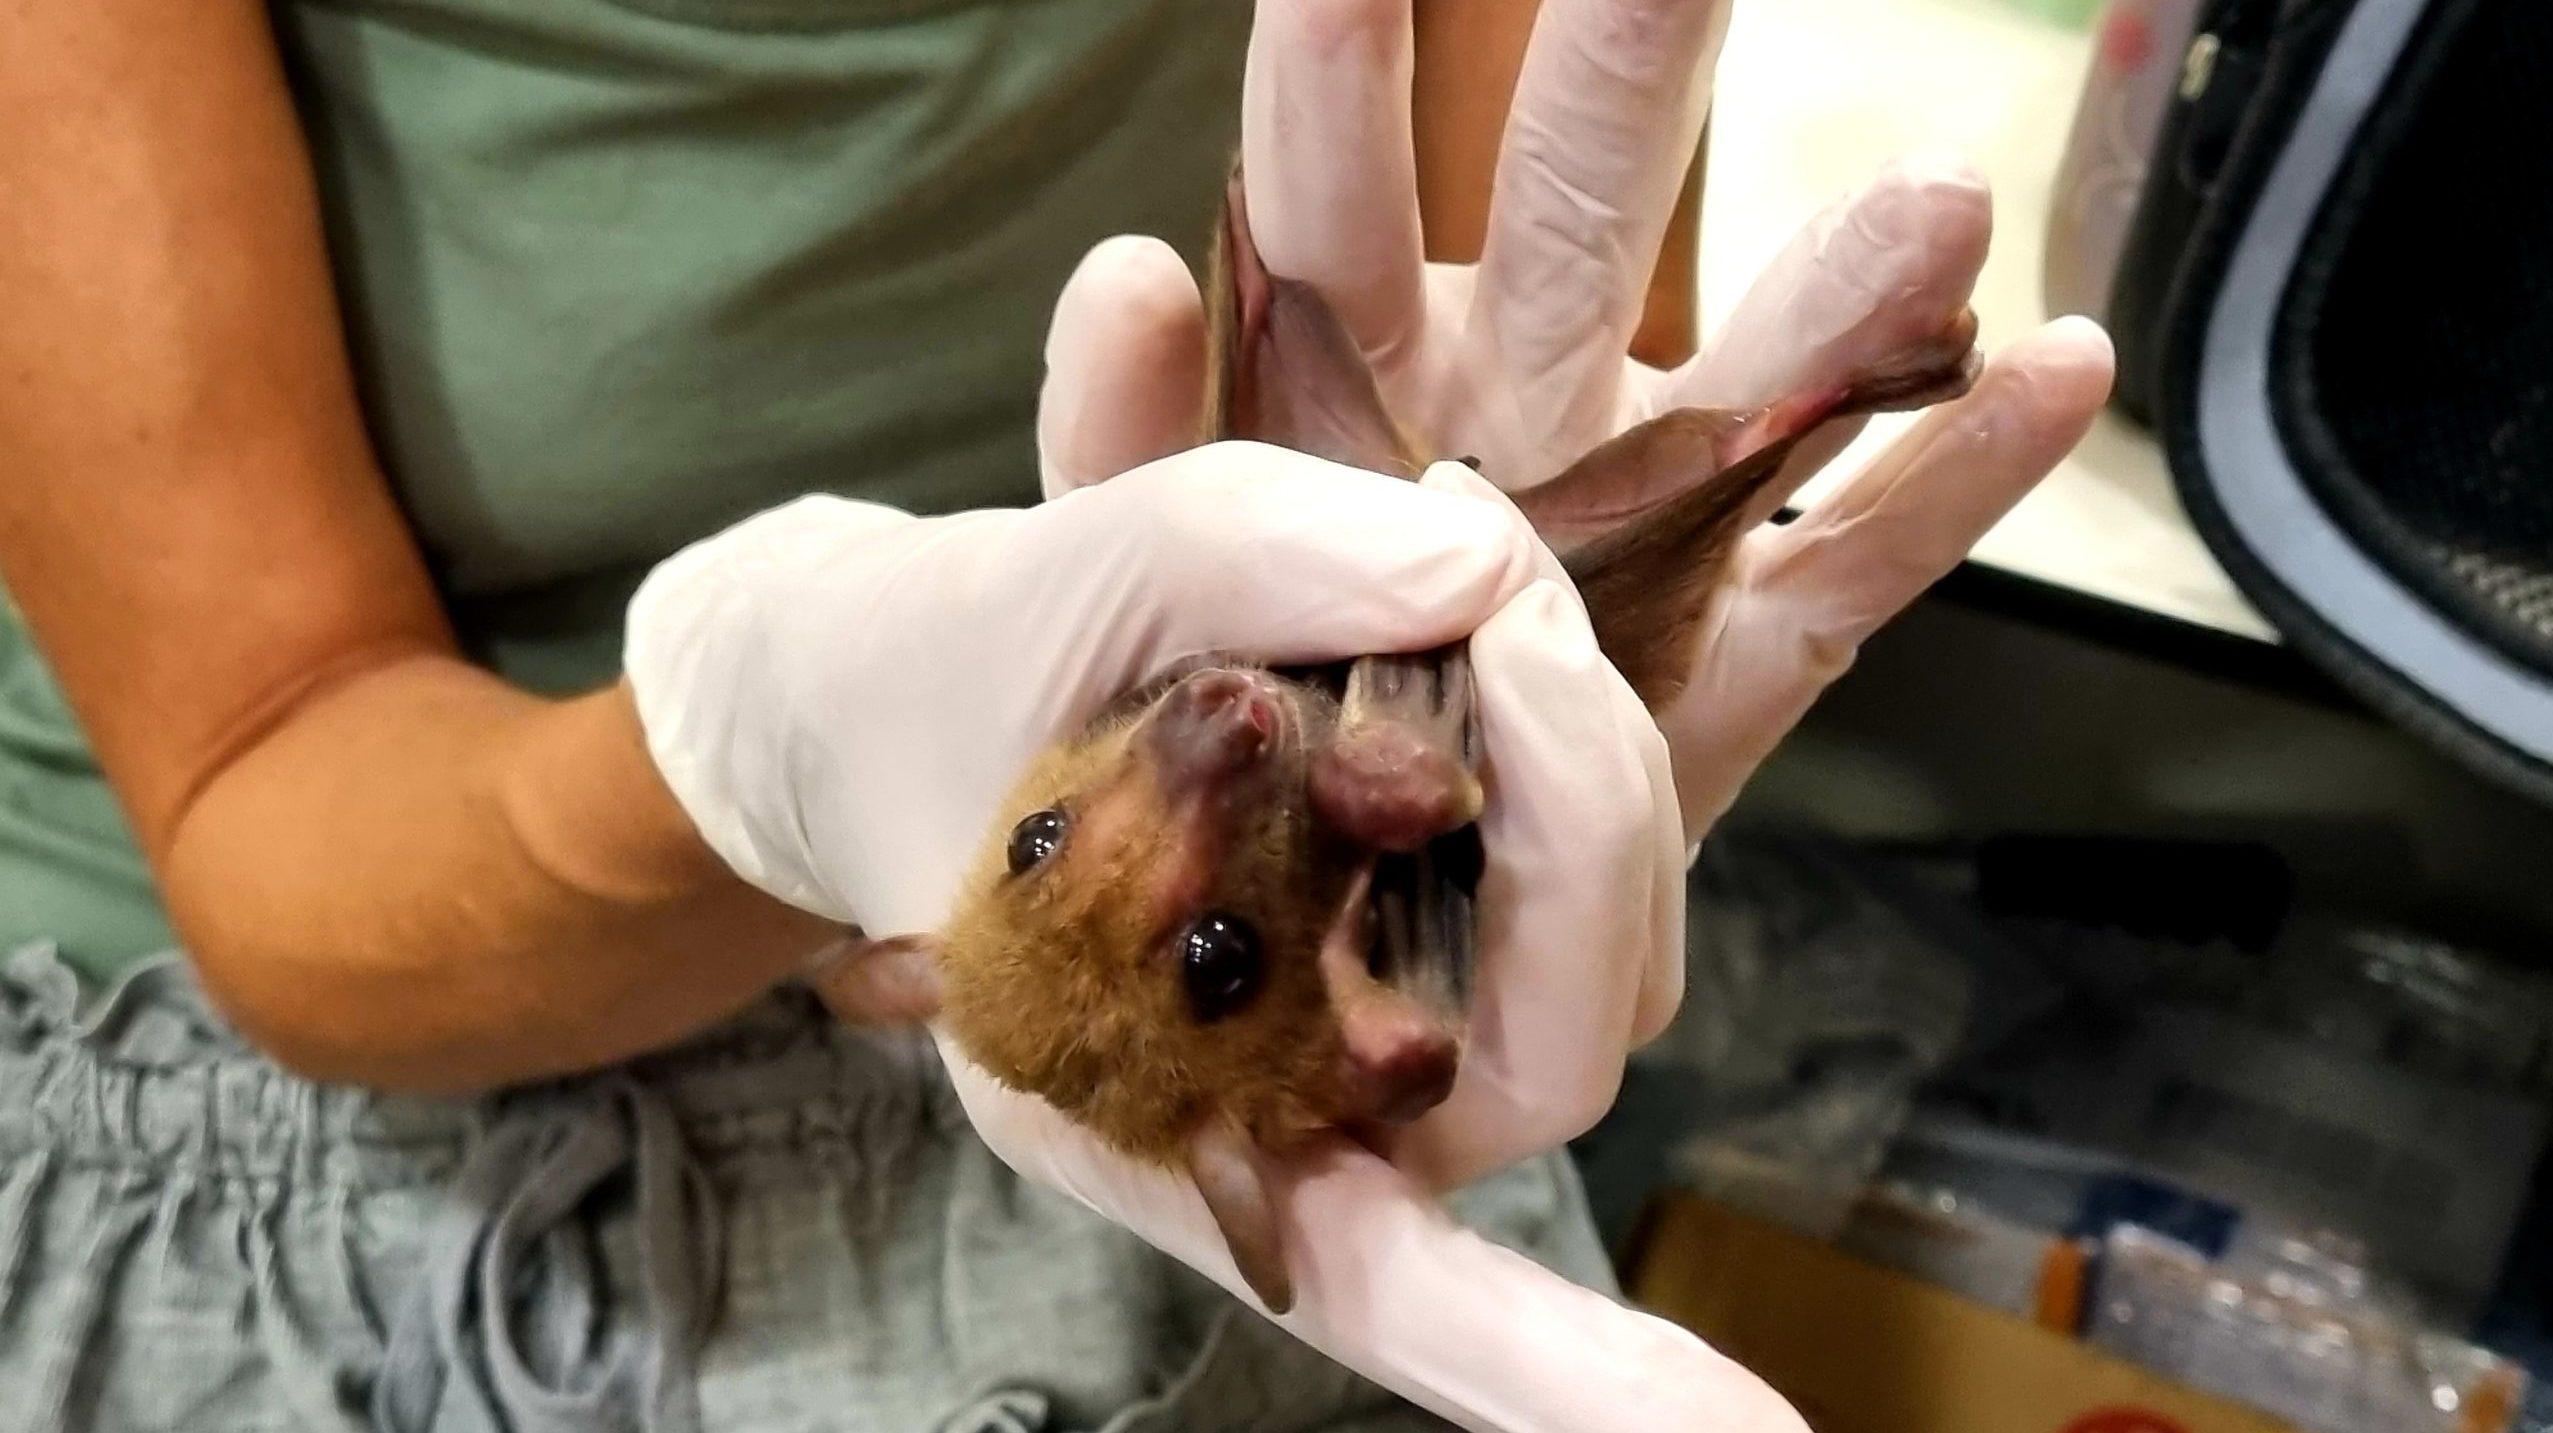 COVID-19 Not Connected to Bats, Israeli Biologists Say (with VIDEO)